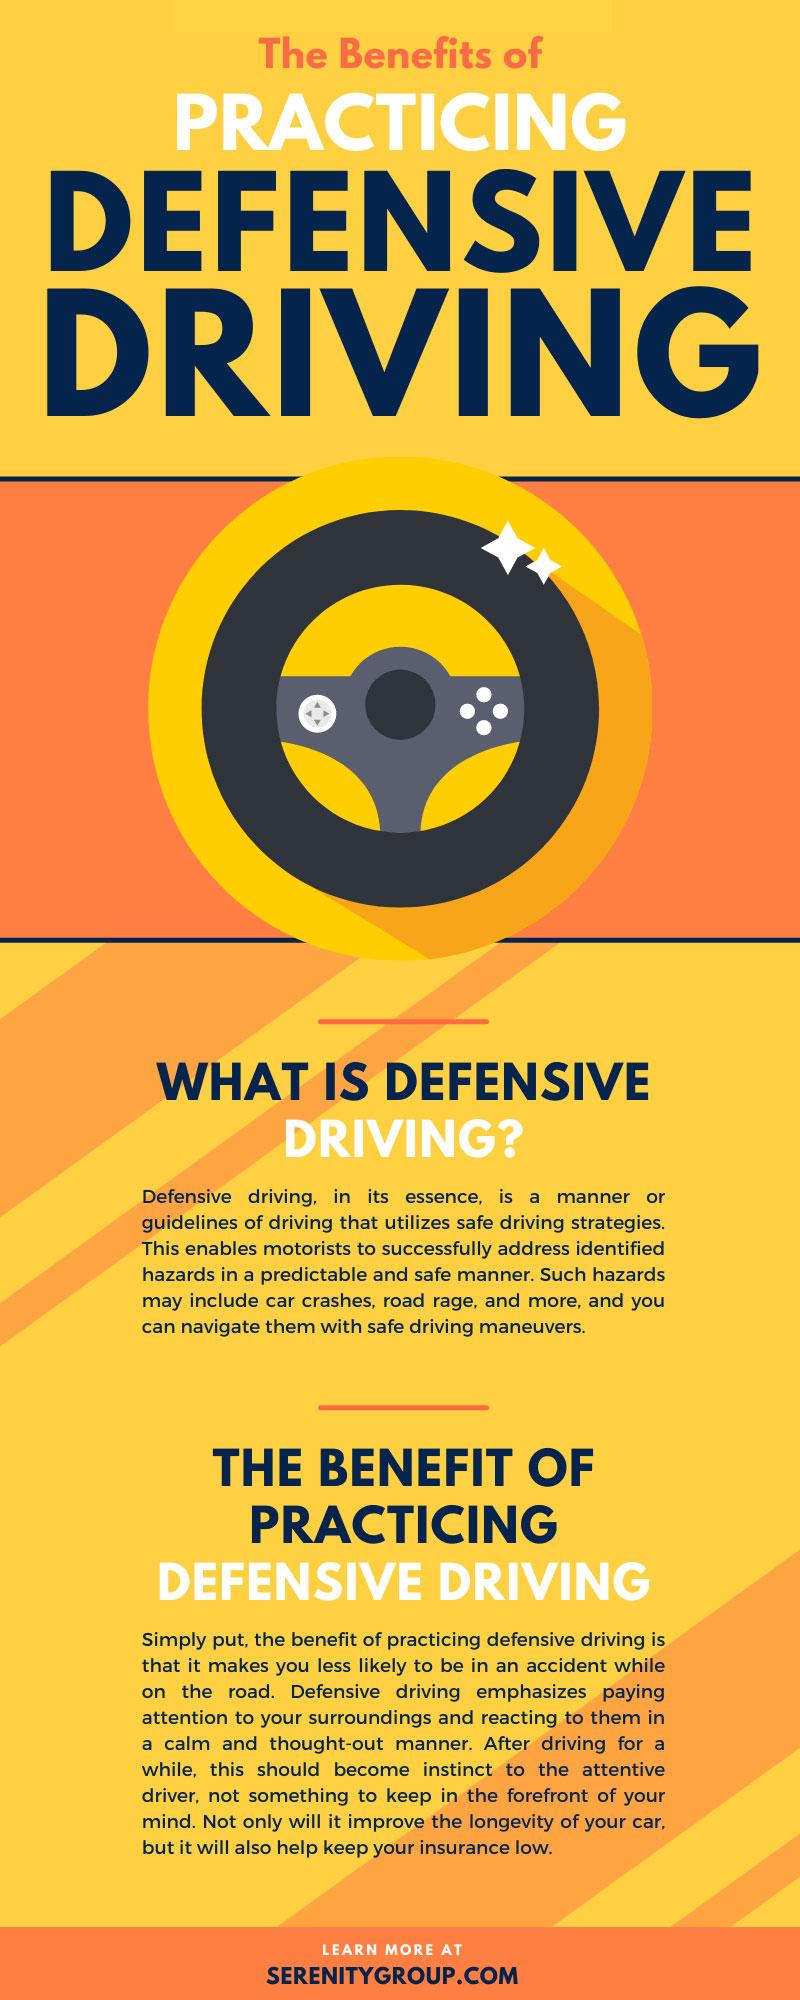 Defensive Driving Techniques: Safety Strategies